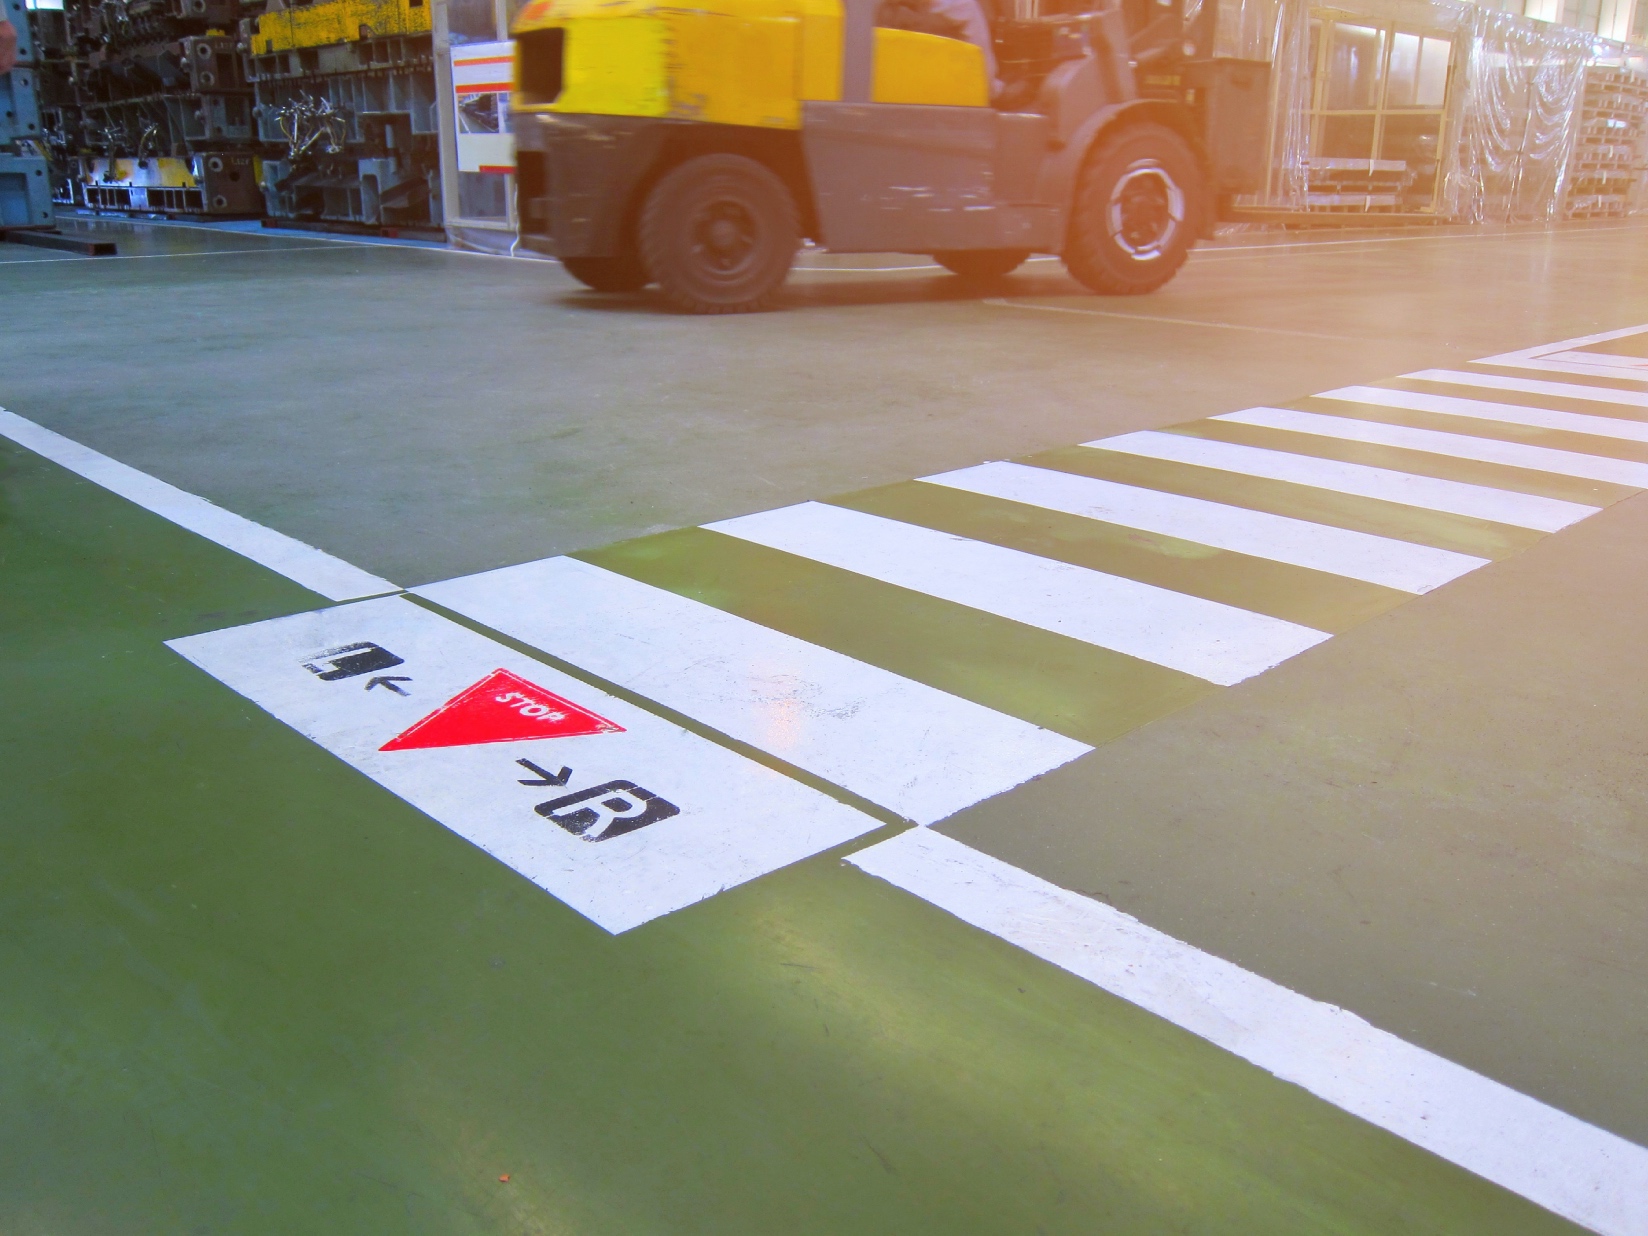 Keeping Forklifts And Pedestrians Apart: Safety Measures To Consider